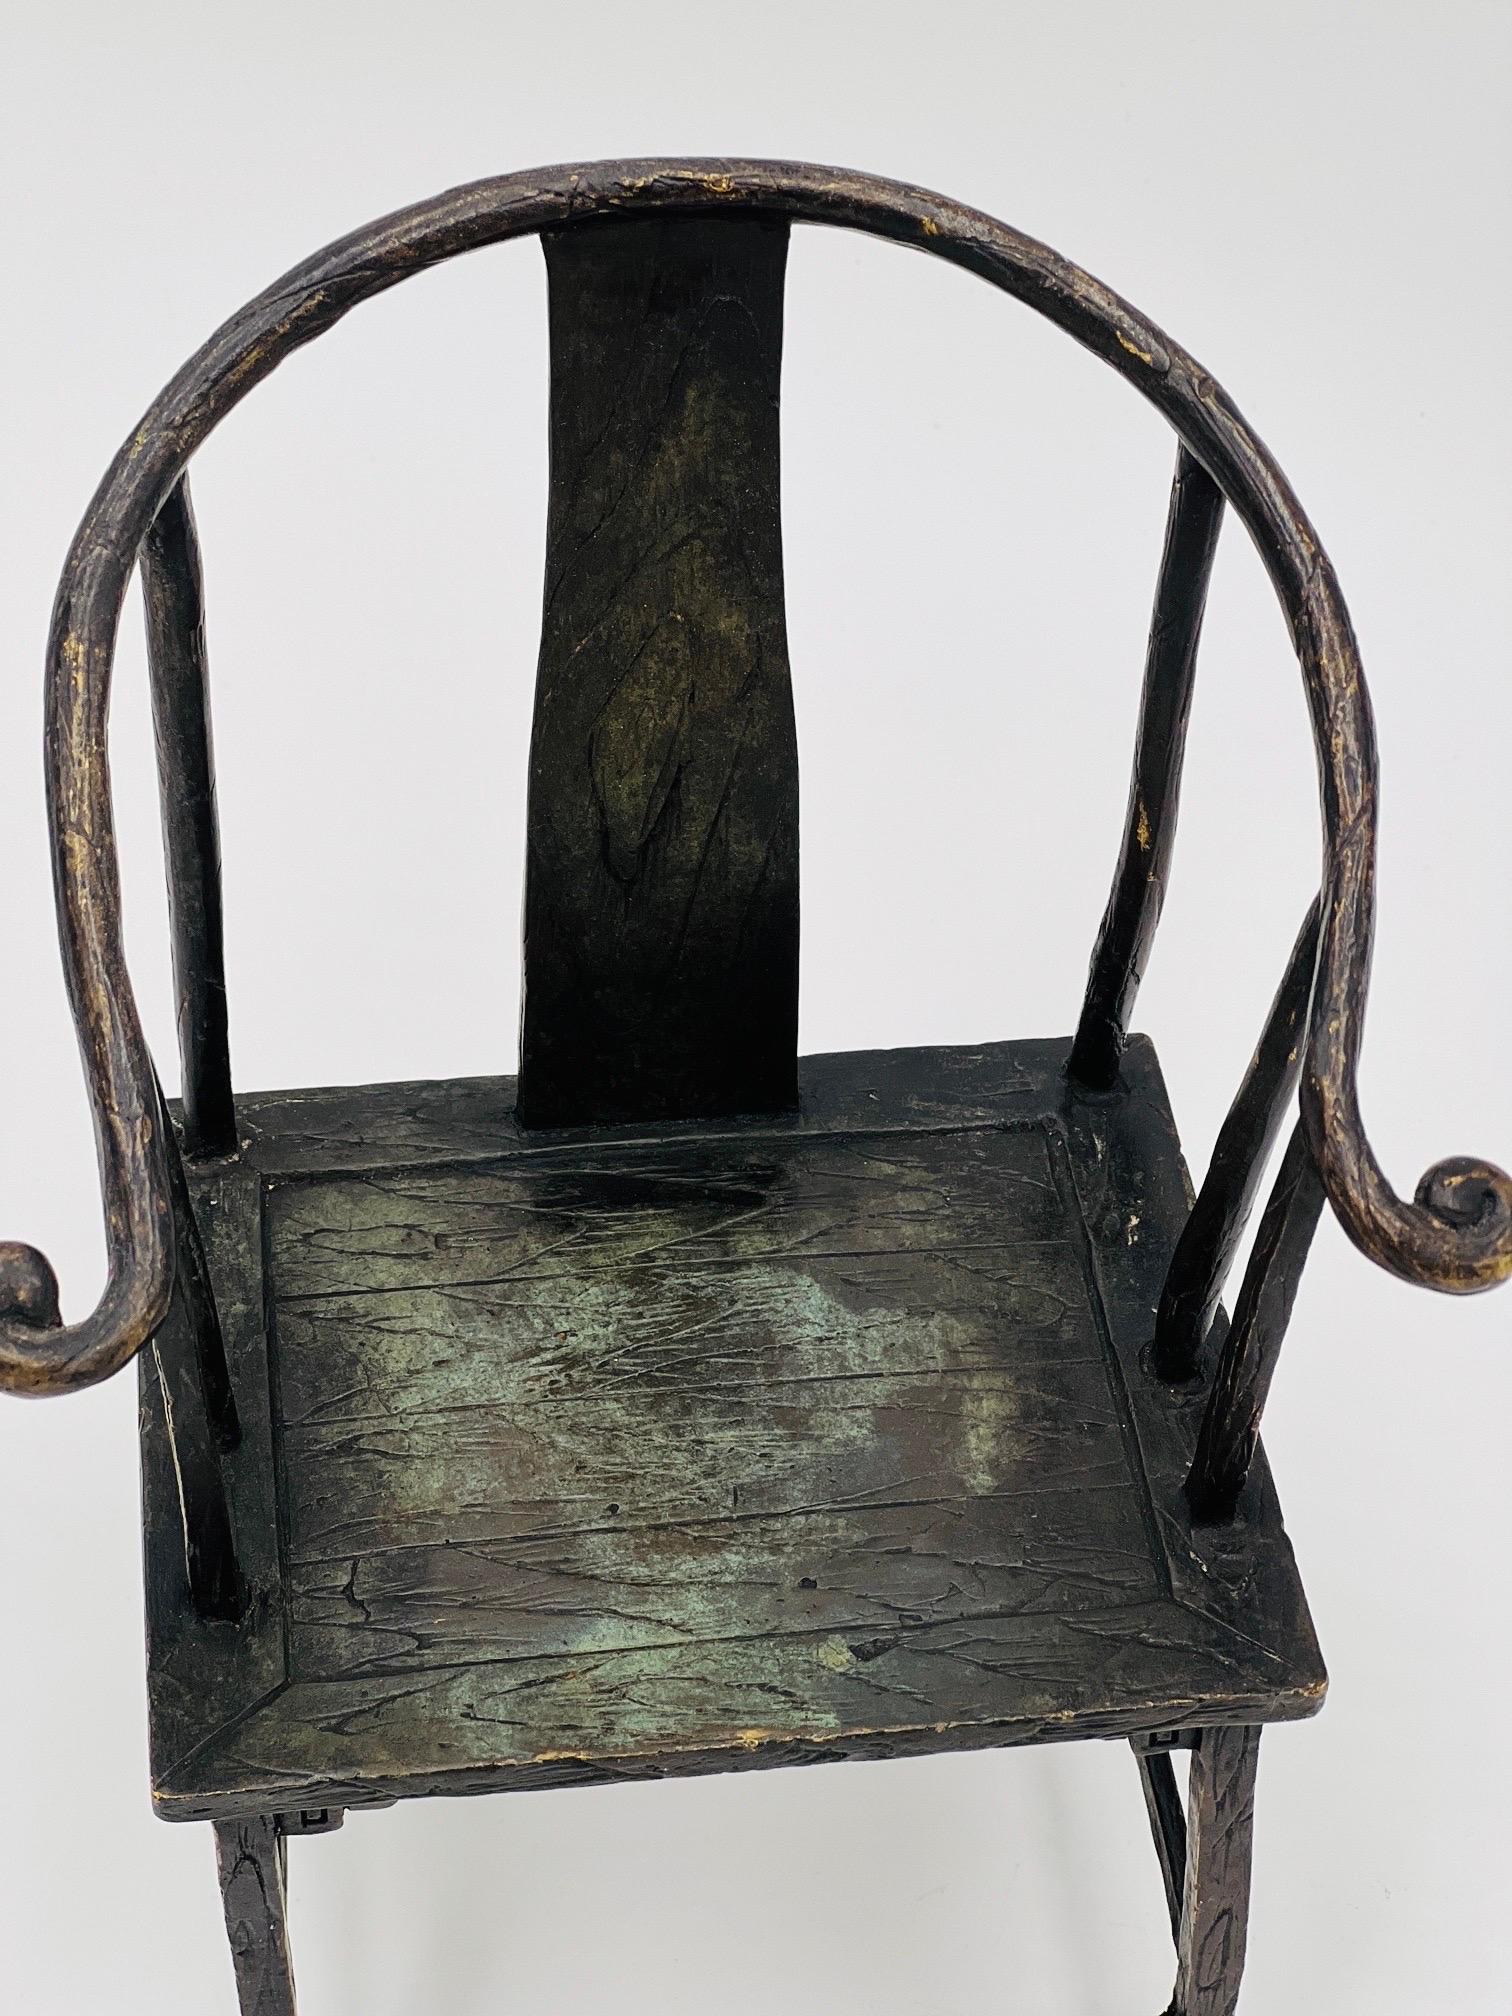 A contemporary bronze sculpture of a Chinese horseshoe chair constructed in bronze with patina to surface. Marked on back of frame “Milo - 2010”. 

Measures: 8.375” H X 6.25” W X 3.875” D.